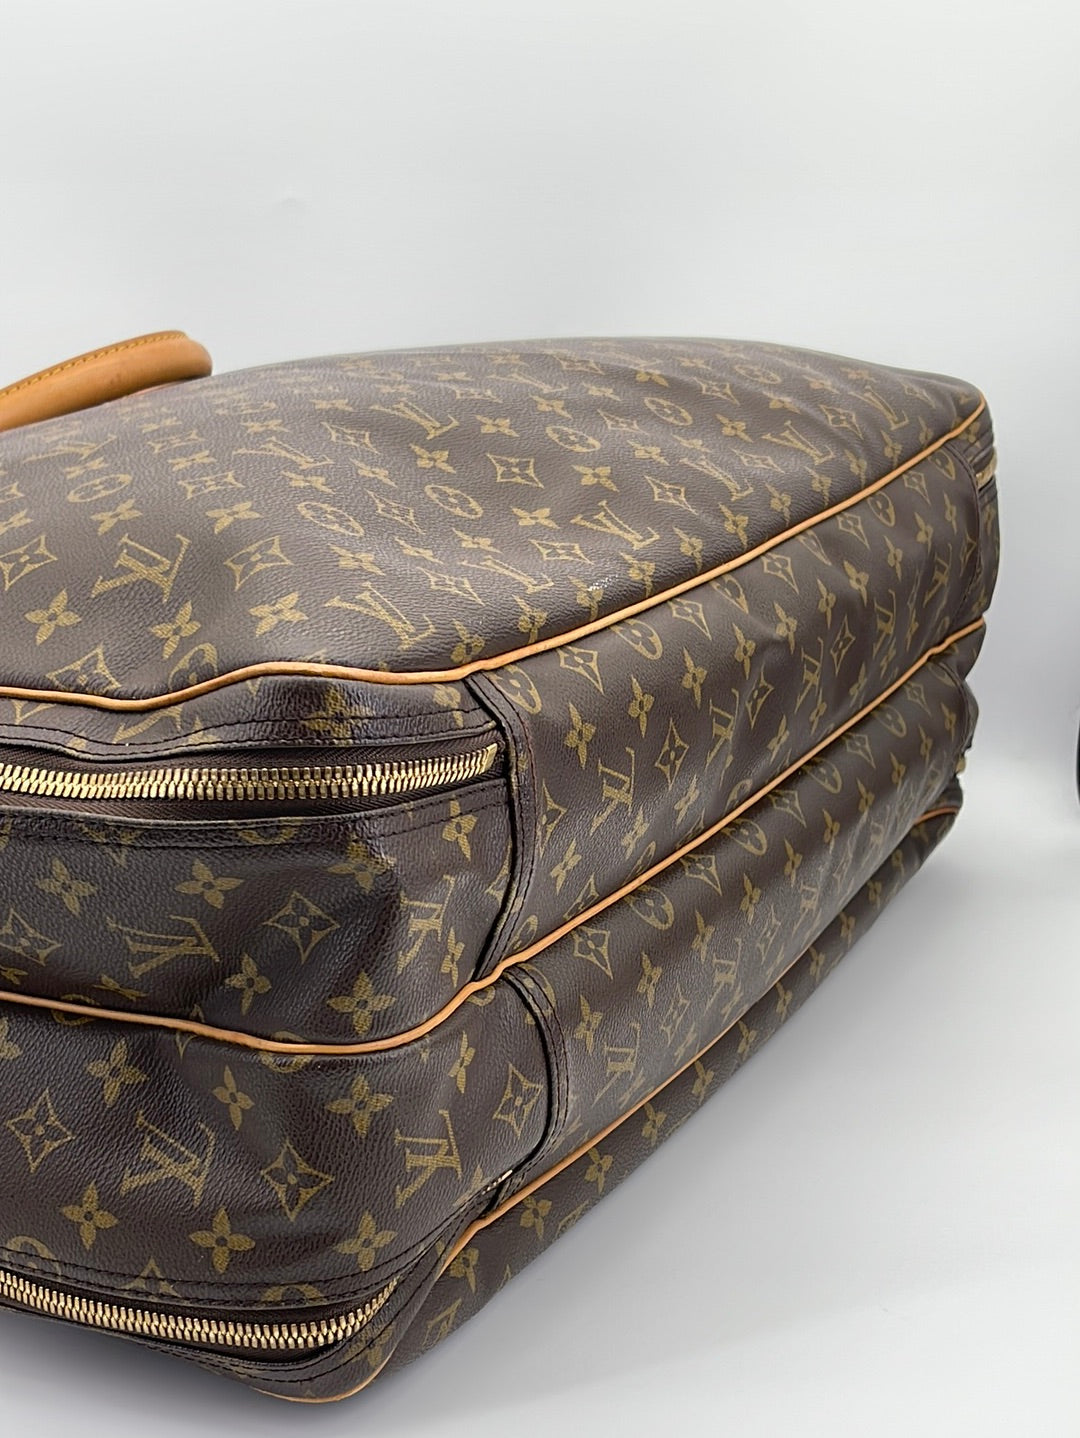 Louis Vuitton Alize - 12 For Sale on 1stDibs